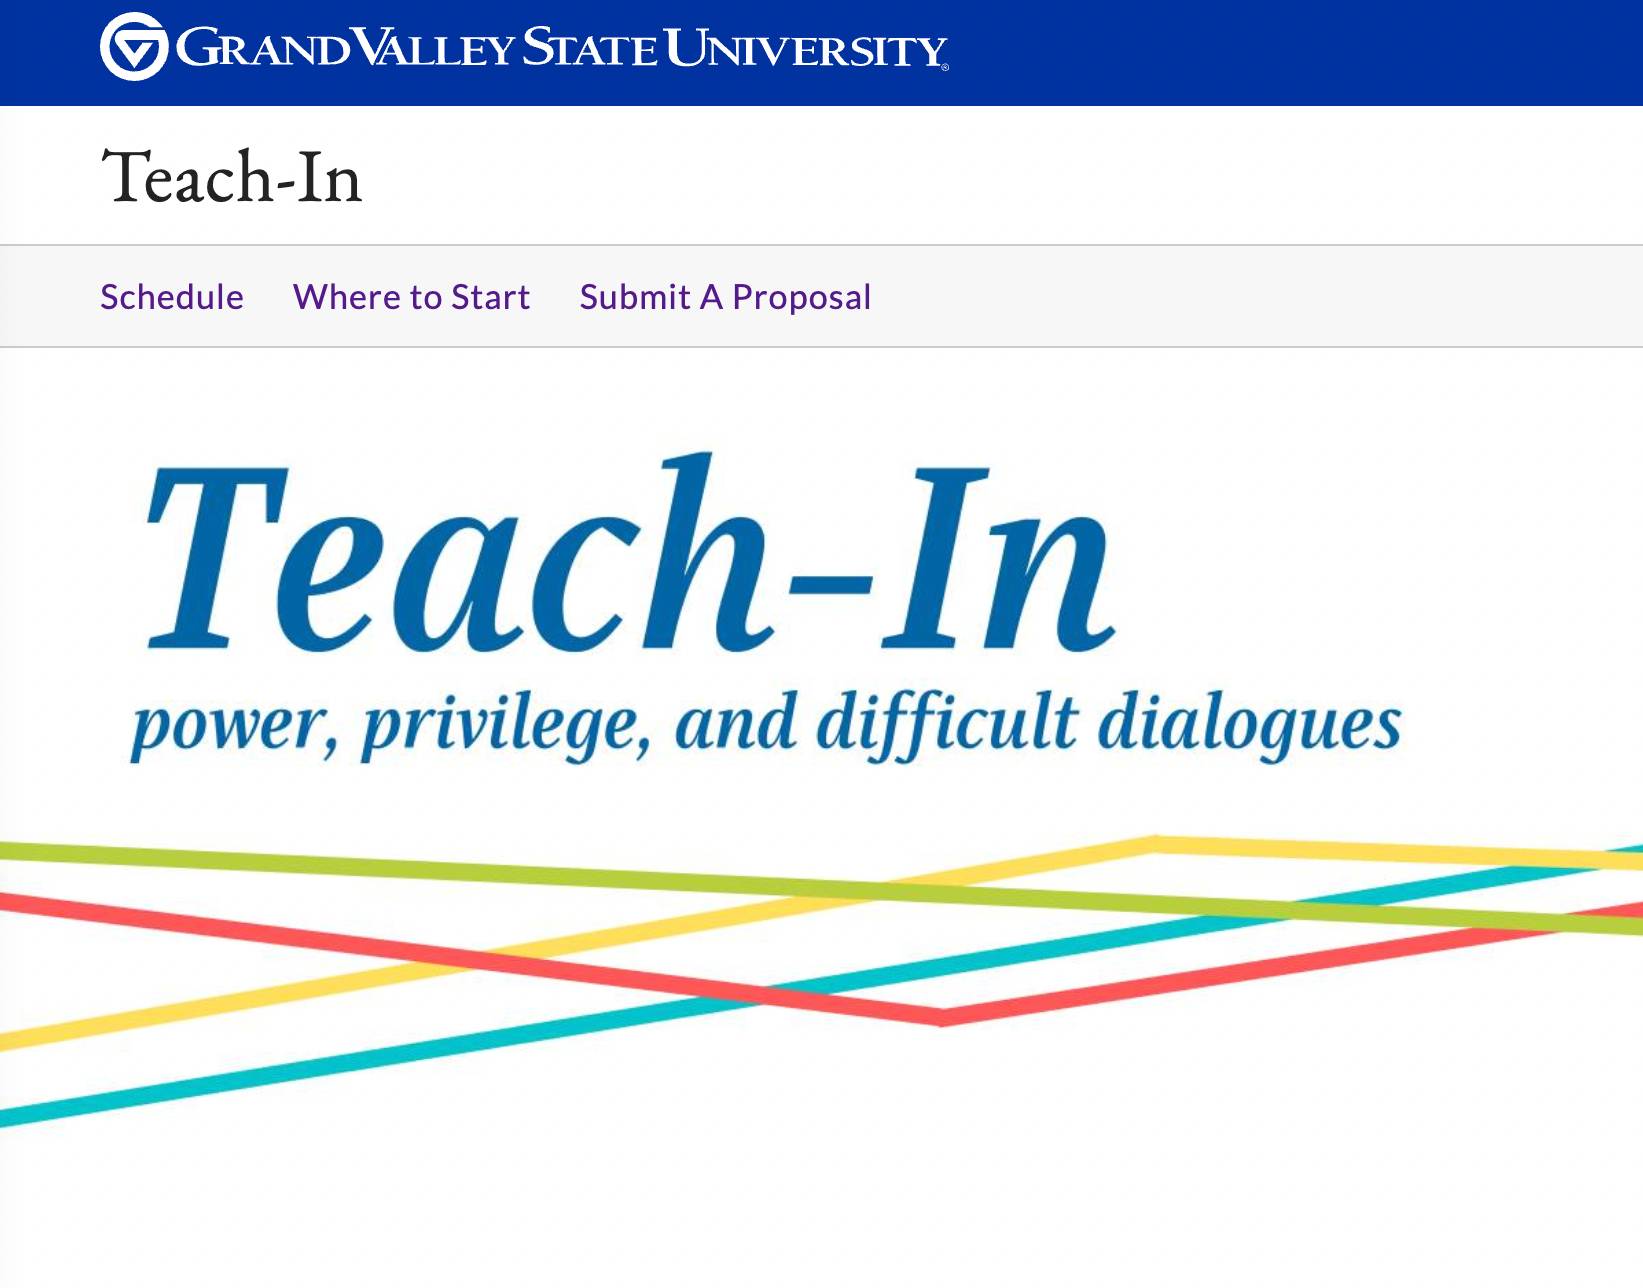 The homepage of the teach-in